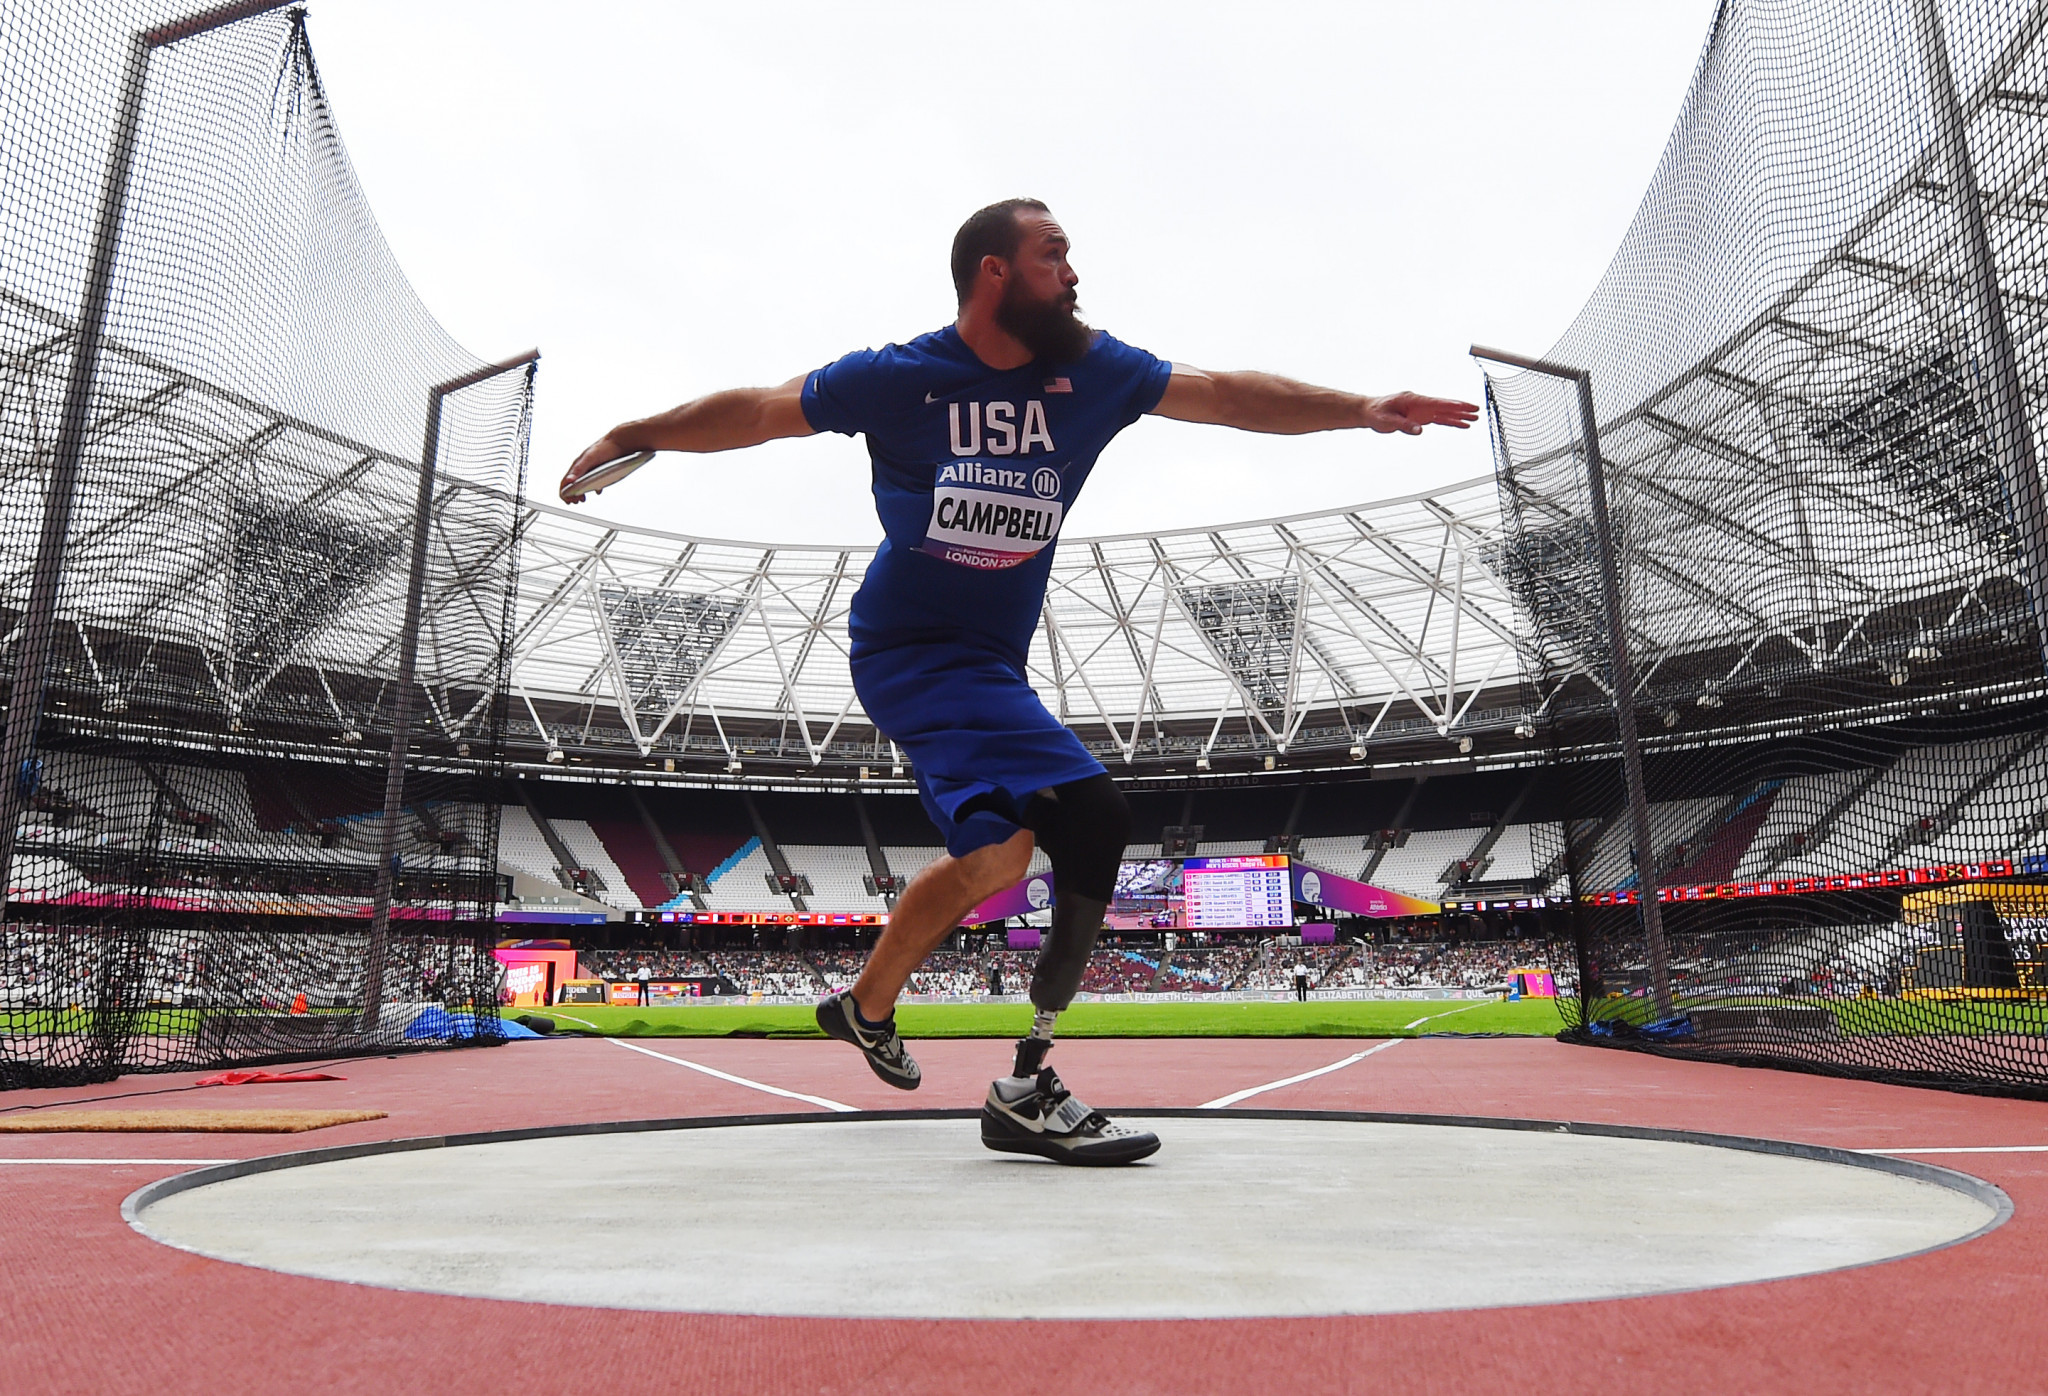 Discus thrower Jeremy Campbell is one of 36 Paralympic champions selected for the US team to compete at the Parapan American Games in Lima ©Getty Images